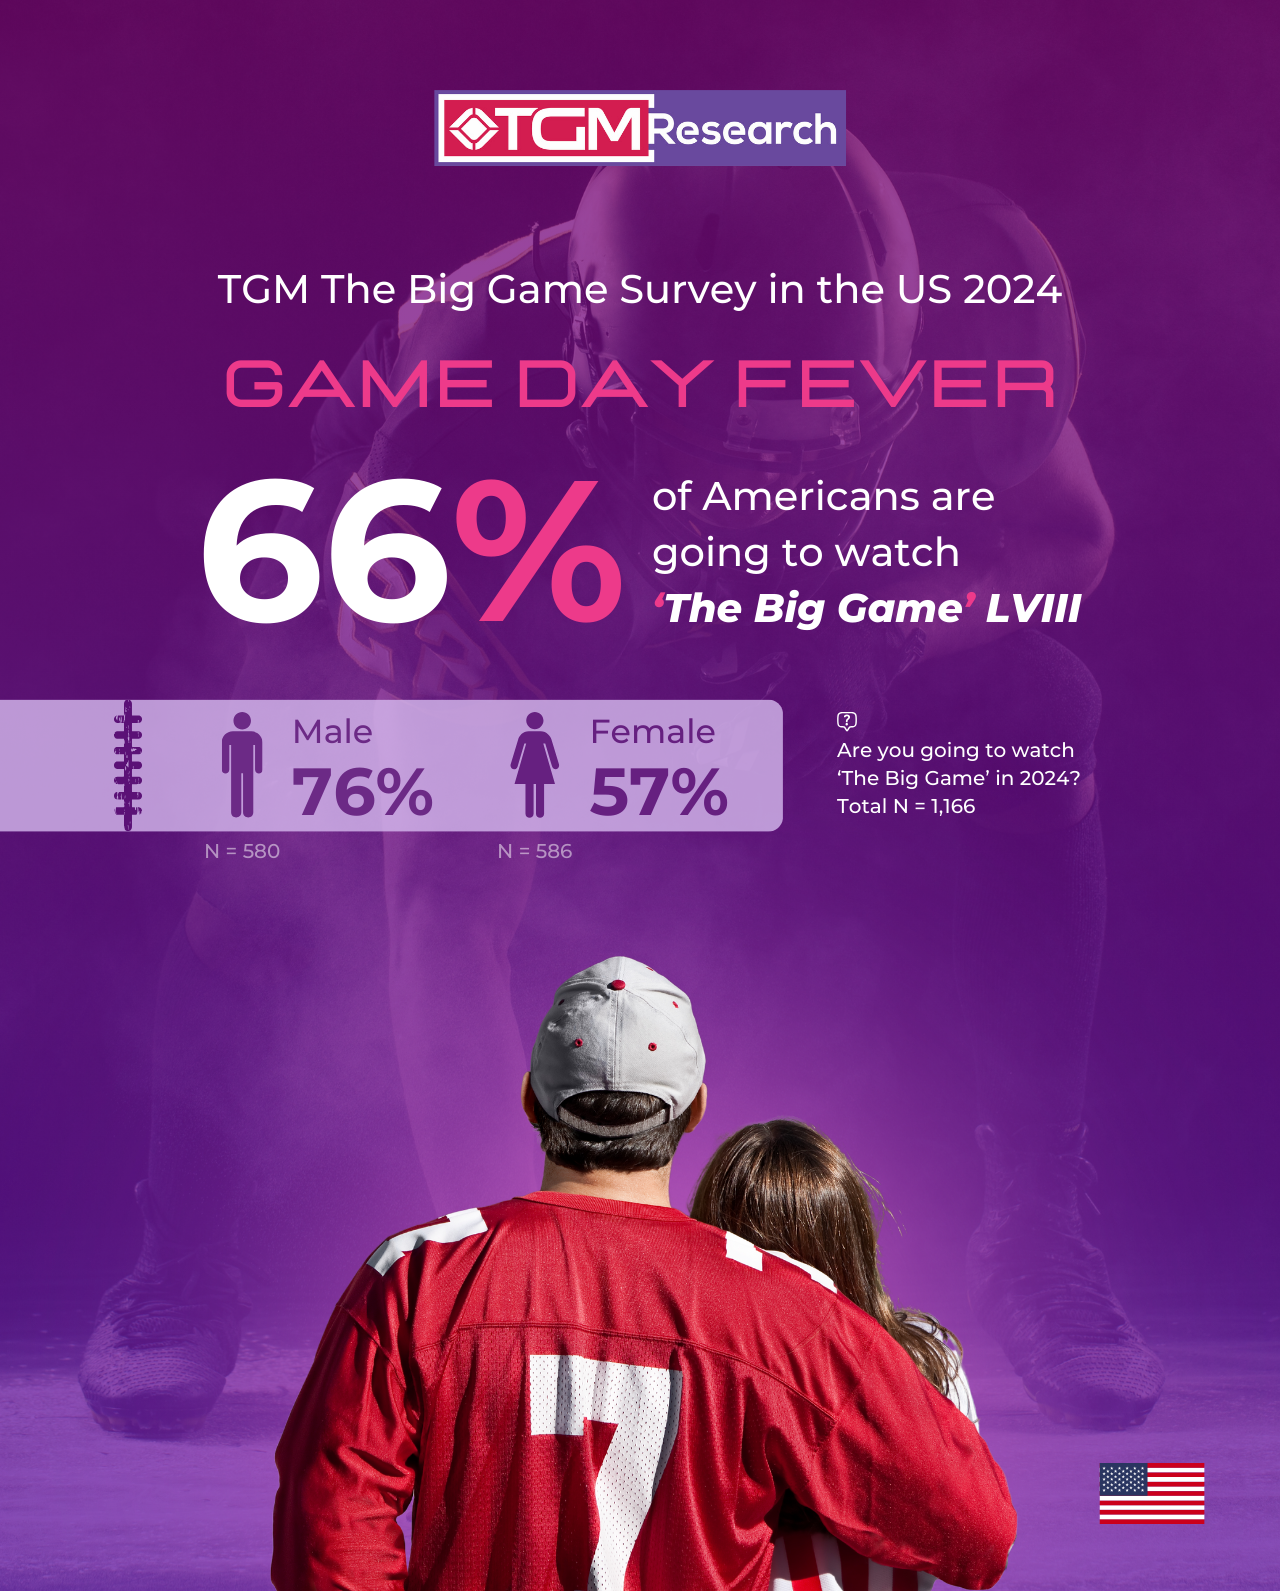 66% of Americans are going to watch 'The Big Game' LVIII